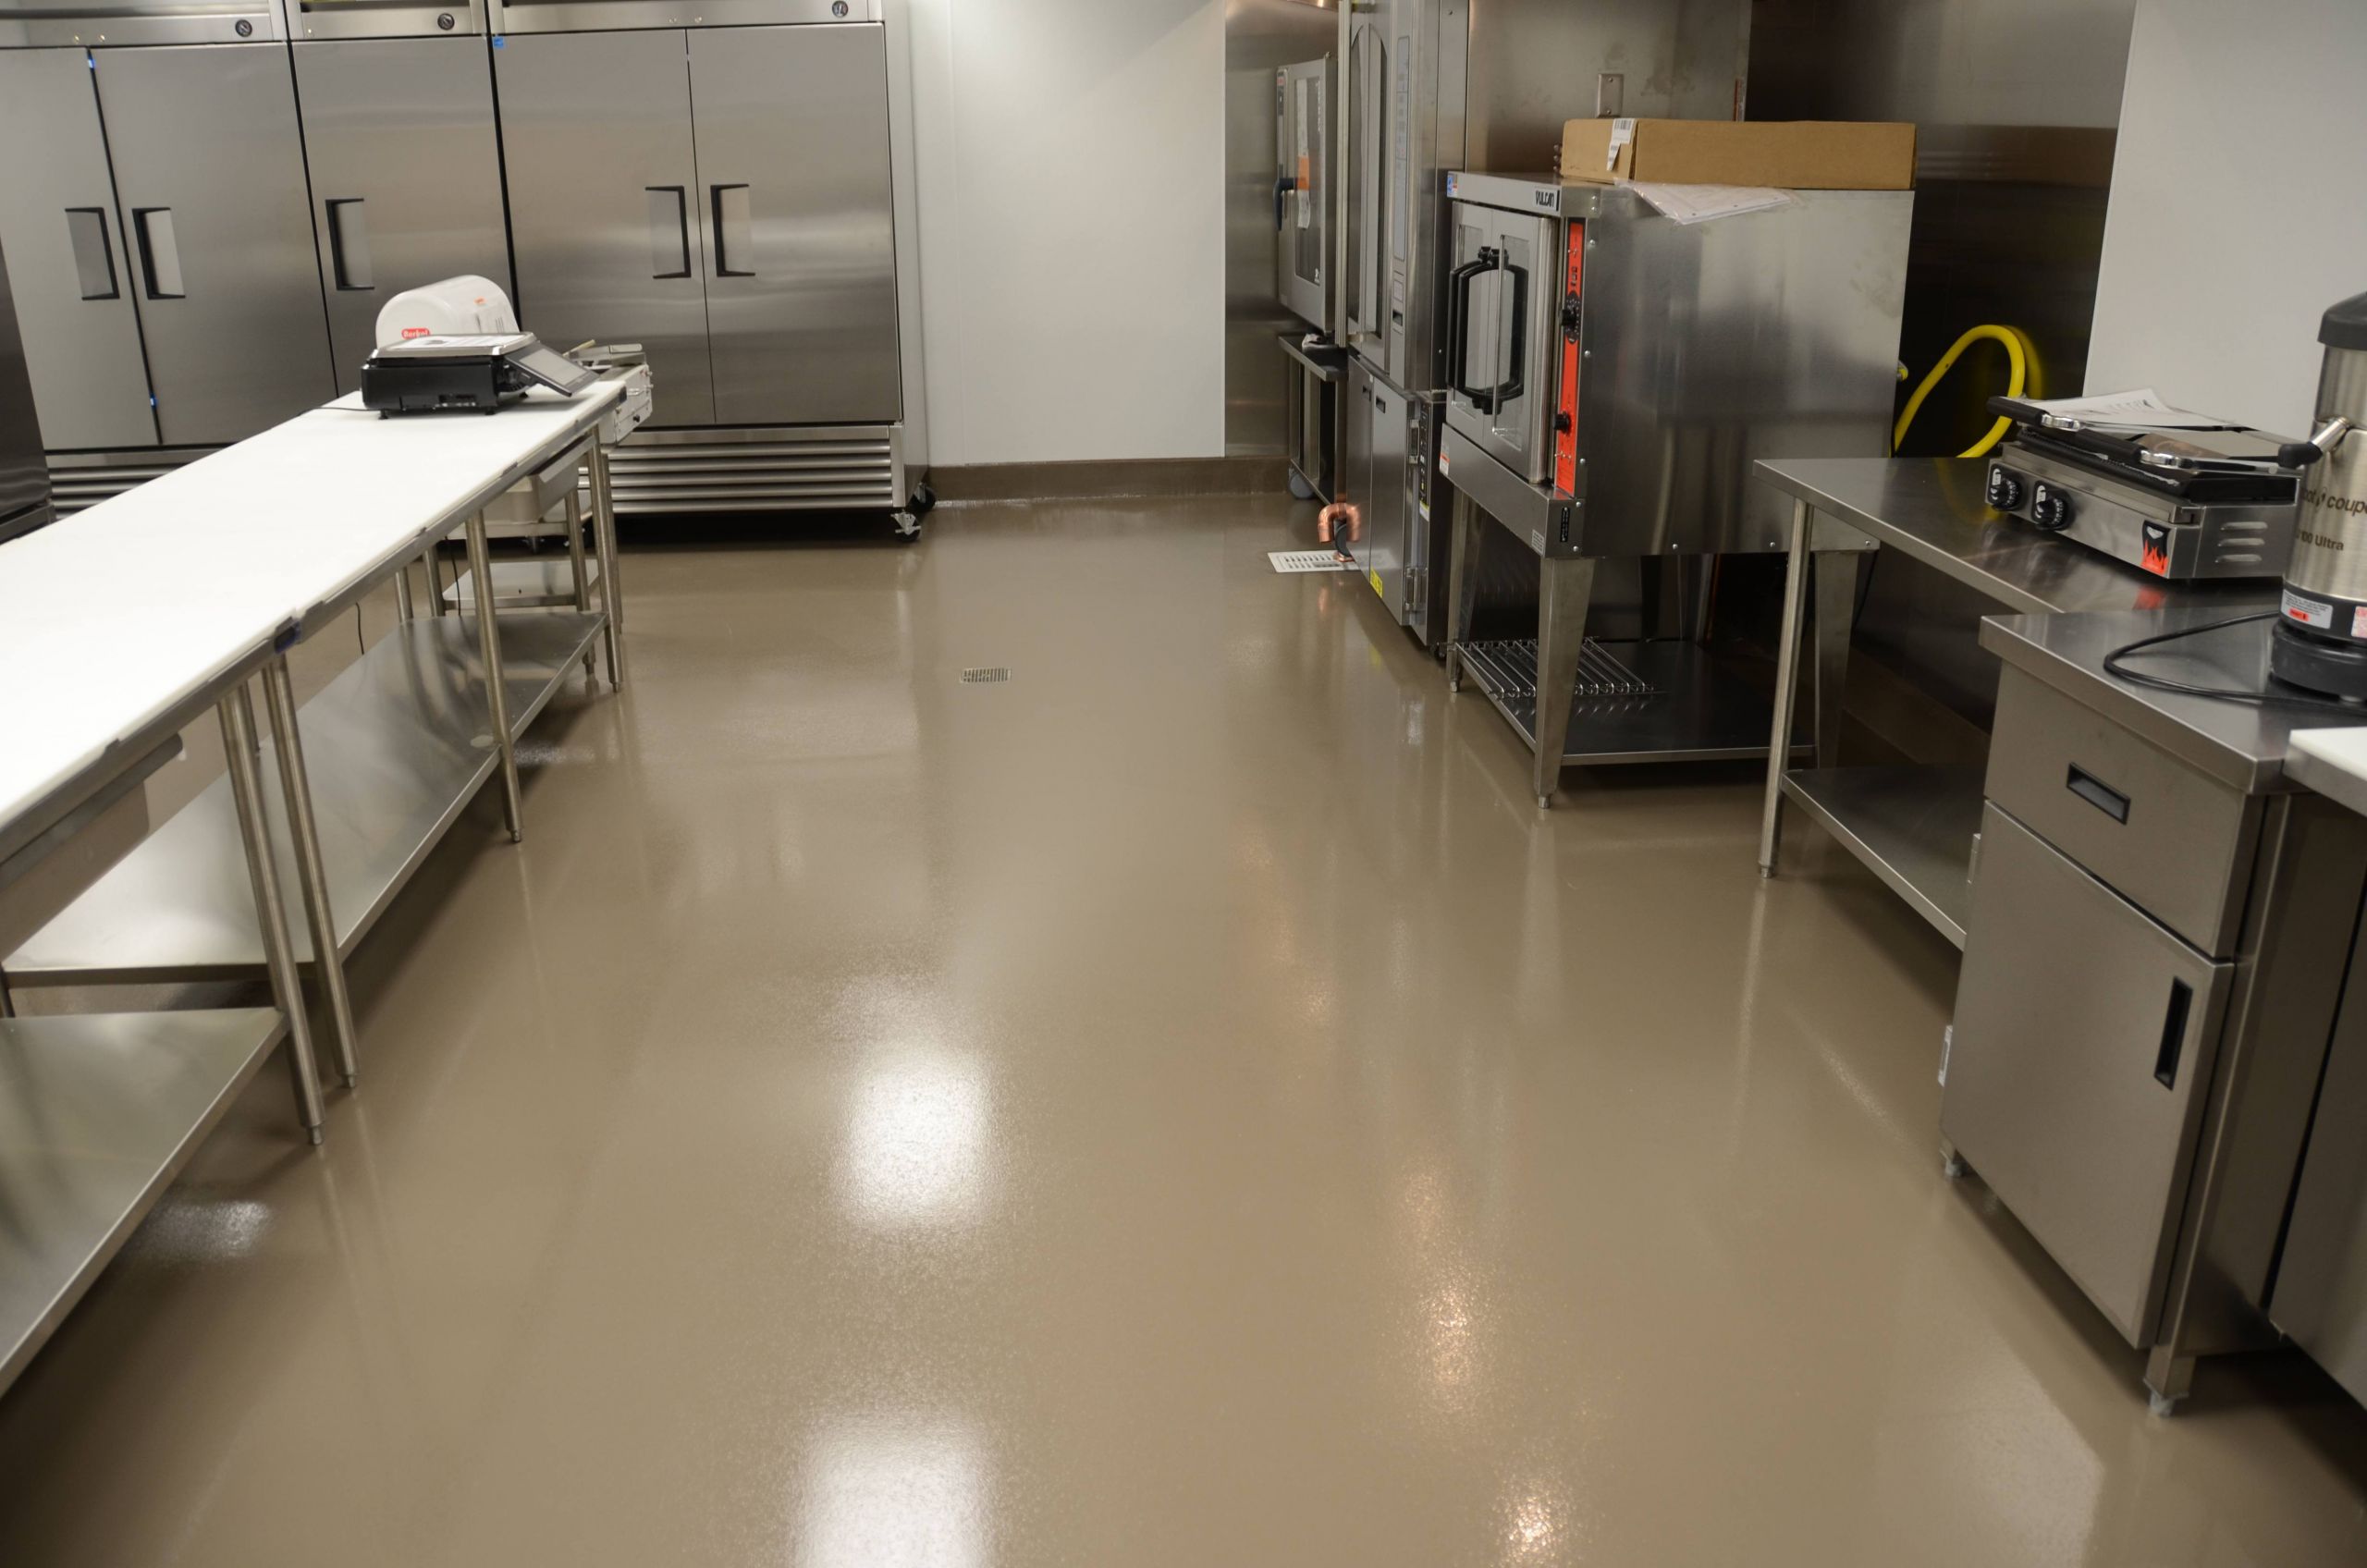 Restaurant Kitchen Floor
 Urethane cement and concrete stain in grocery store